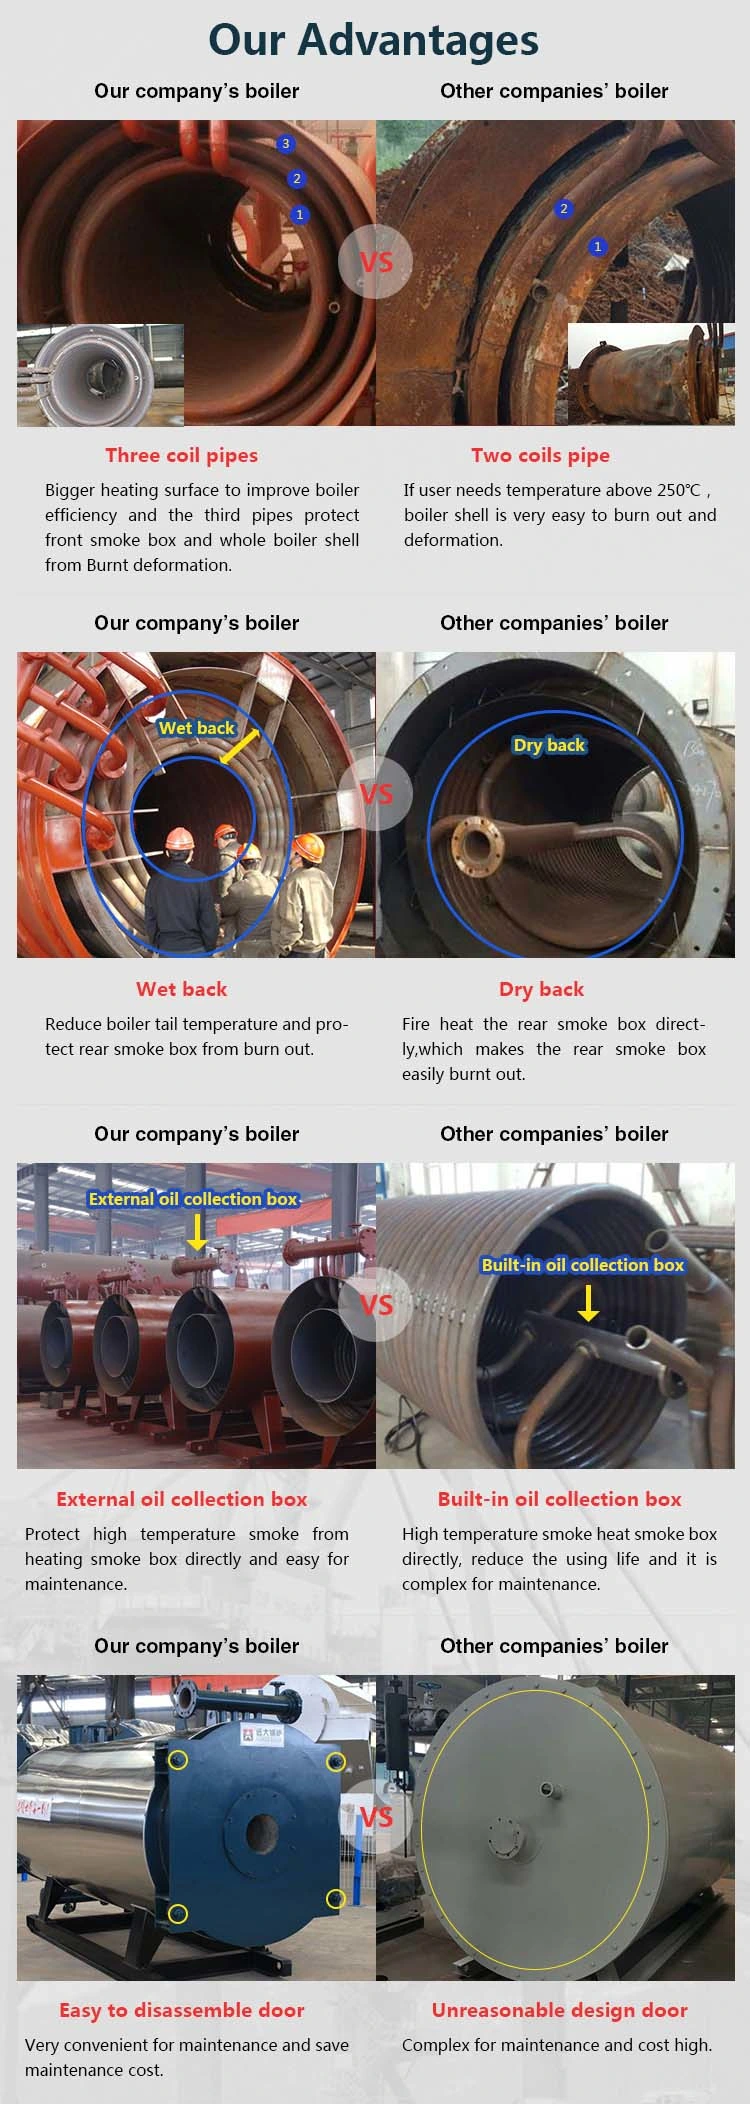 Natural Gas or Diesel Fired Organic Heat Carrier Thermal Oil Boiler